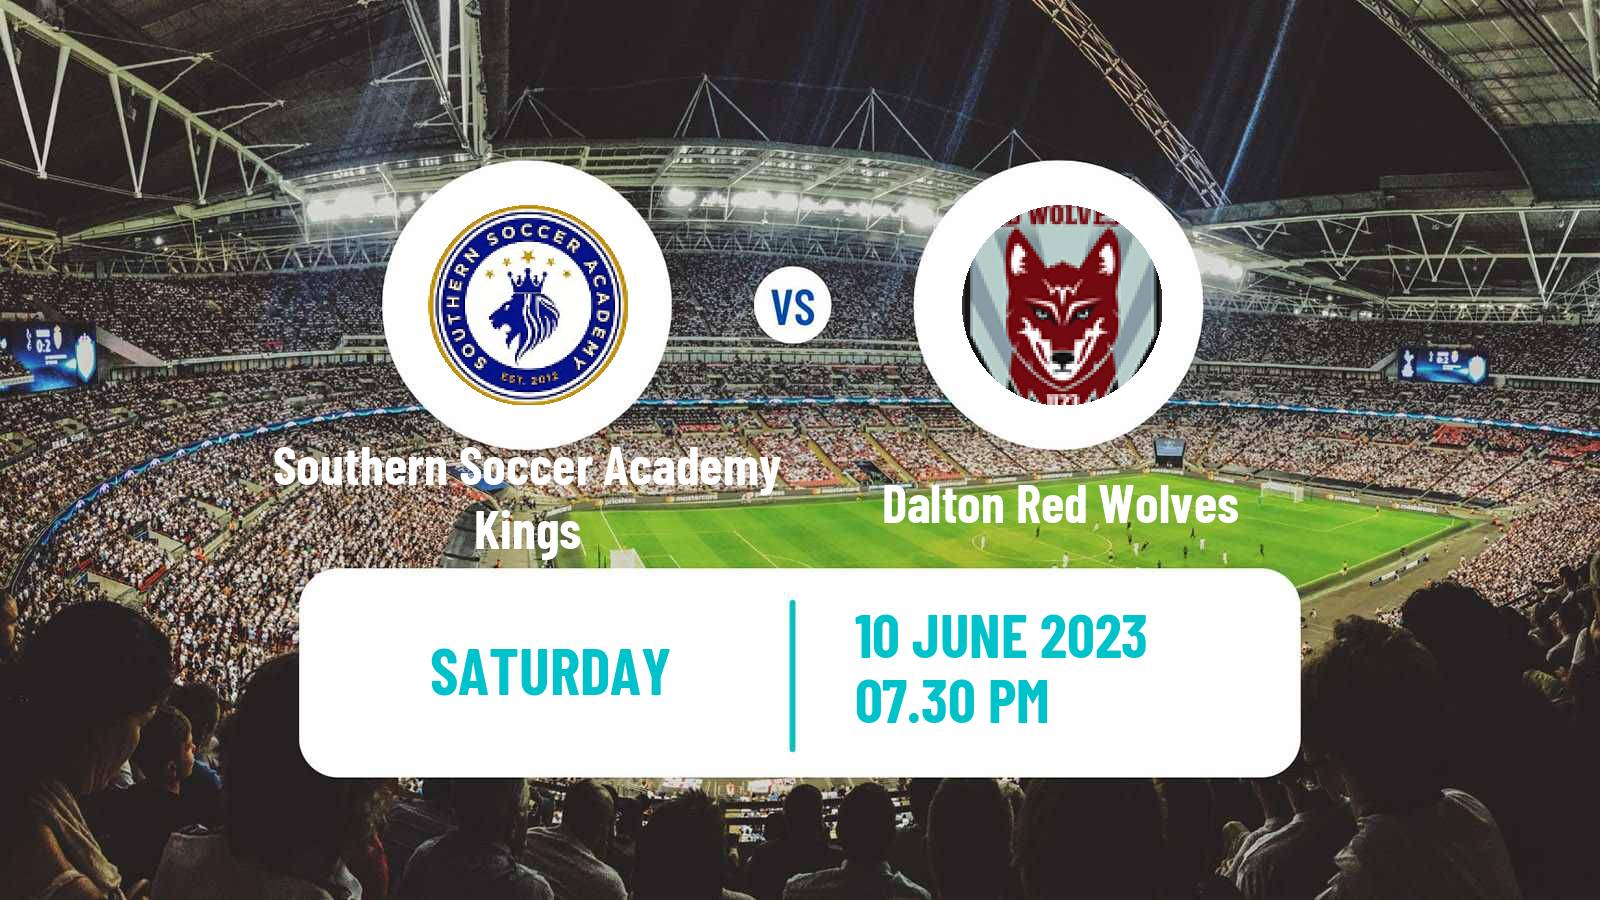 Soccer USL League Two Southern Soccer Academy Kings - Dalton Red Wolves